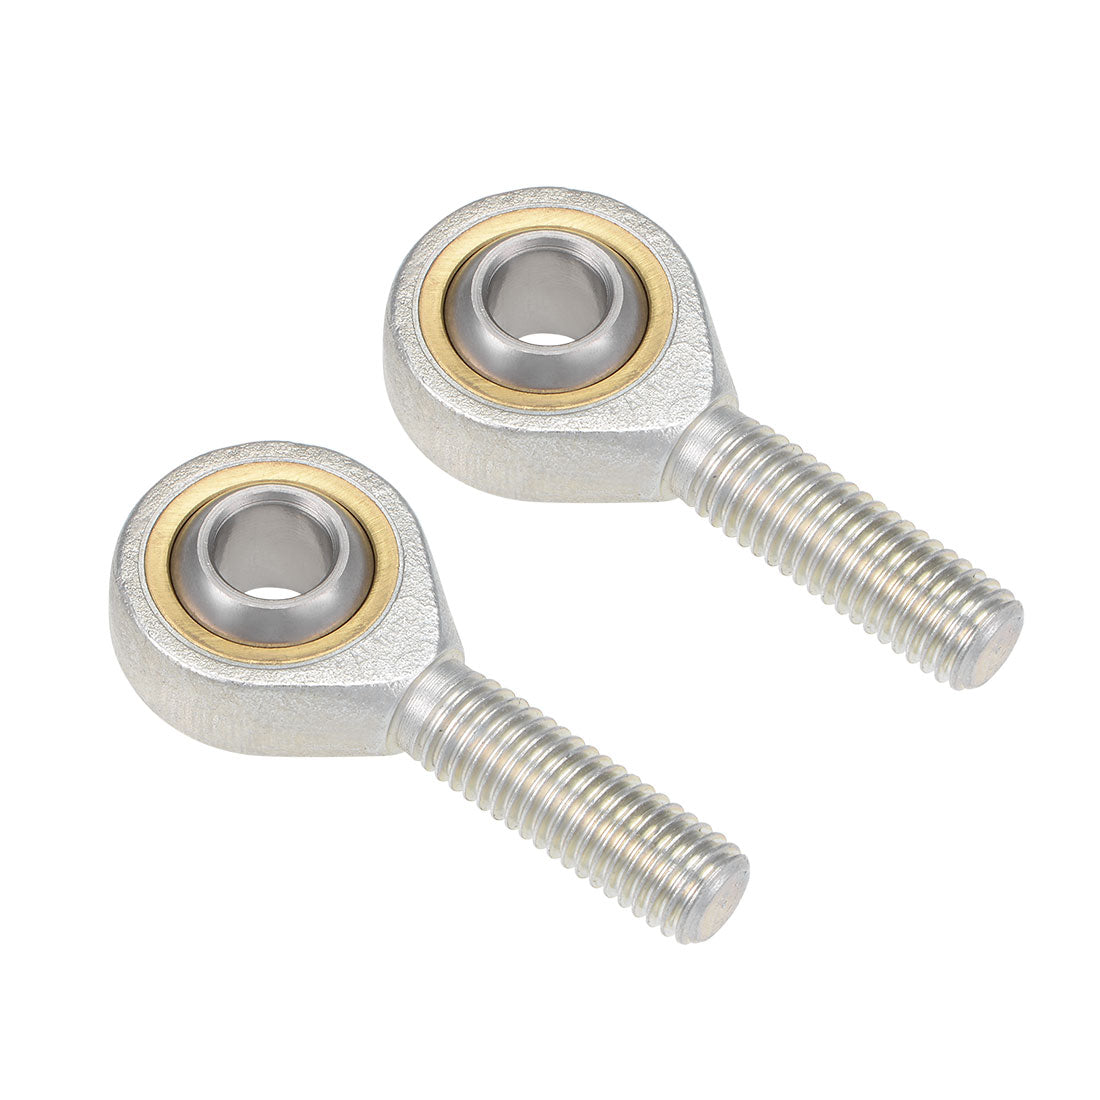 uxcell Uxcell 10mm Rod End Bearing M10x1.5mm Rod Ends Ball Joint Male Left Hand Thread 2pcs